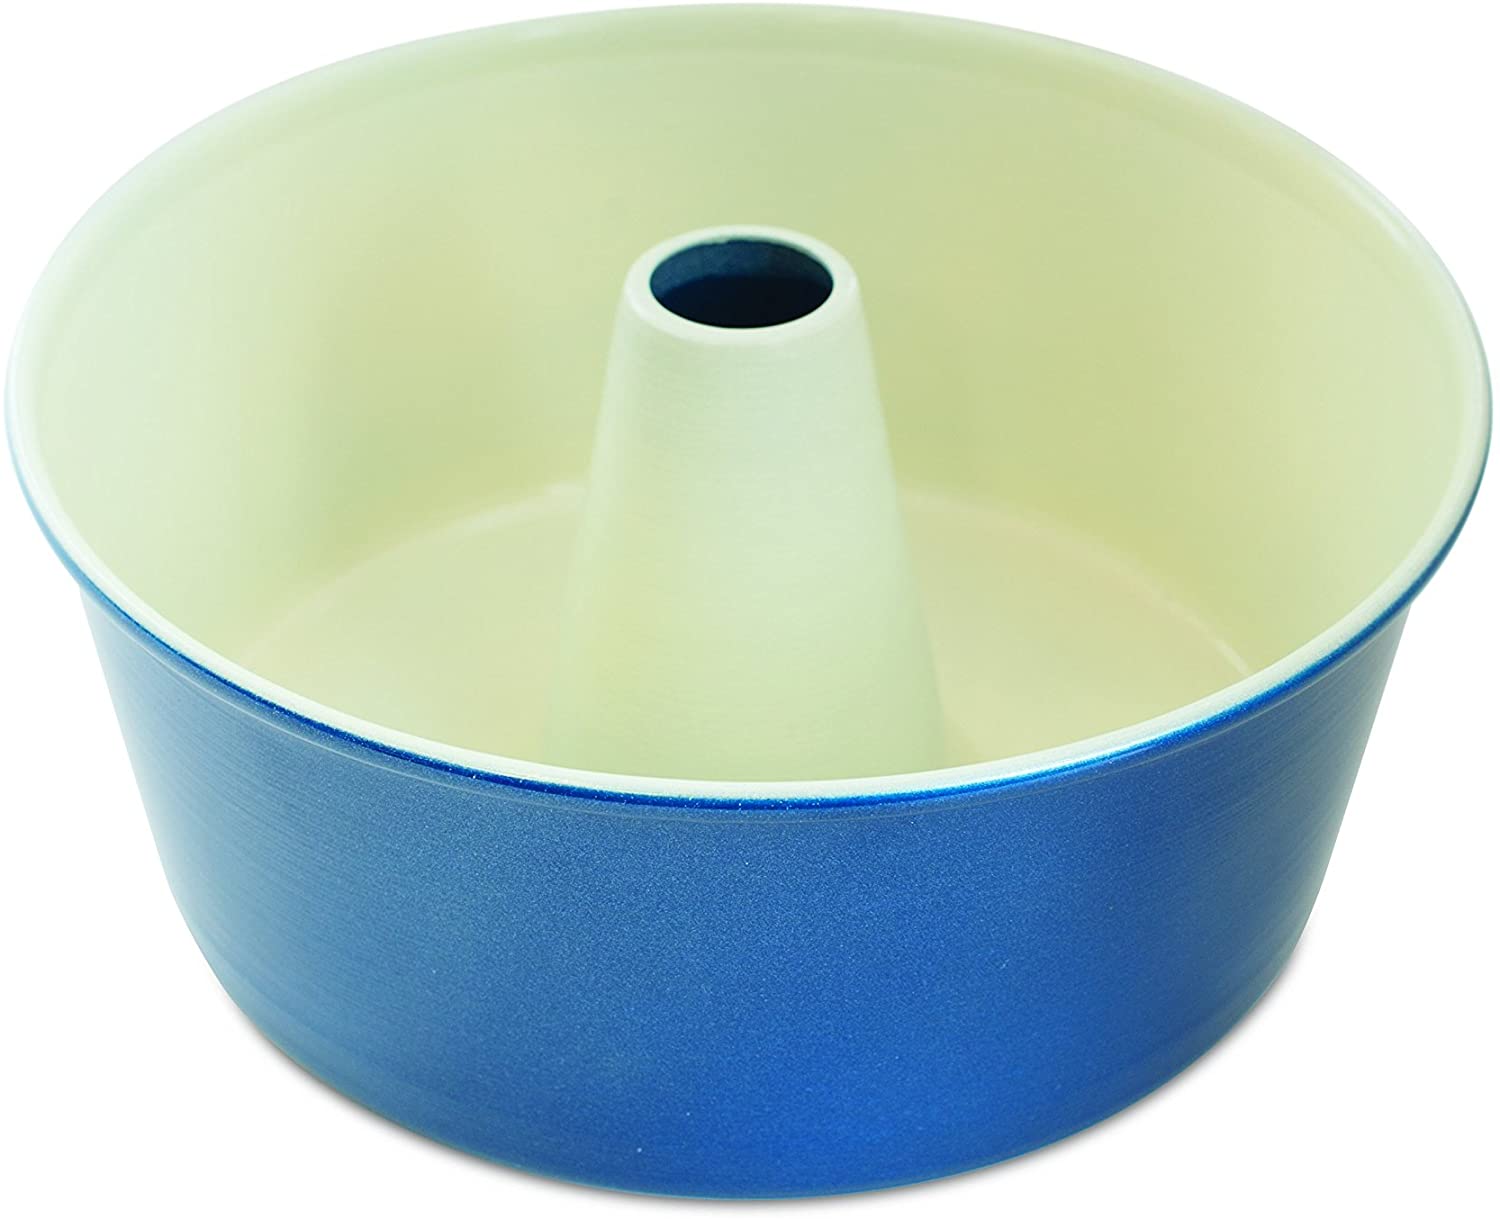 angel food pan with cream interior and  blue exterior.